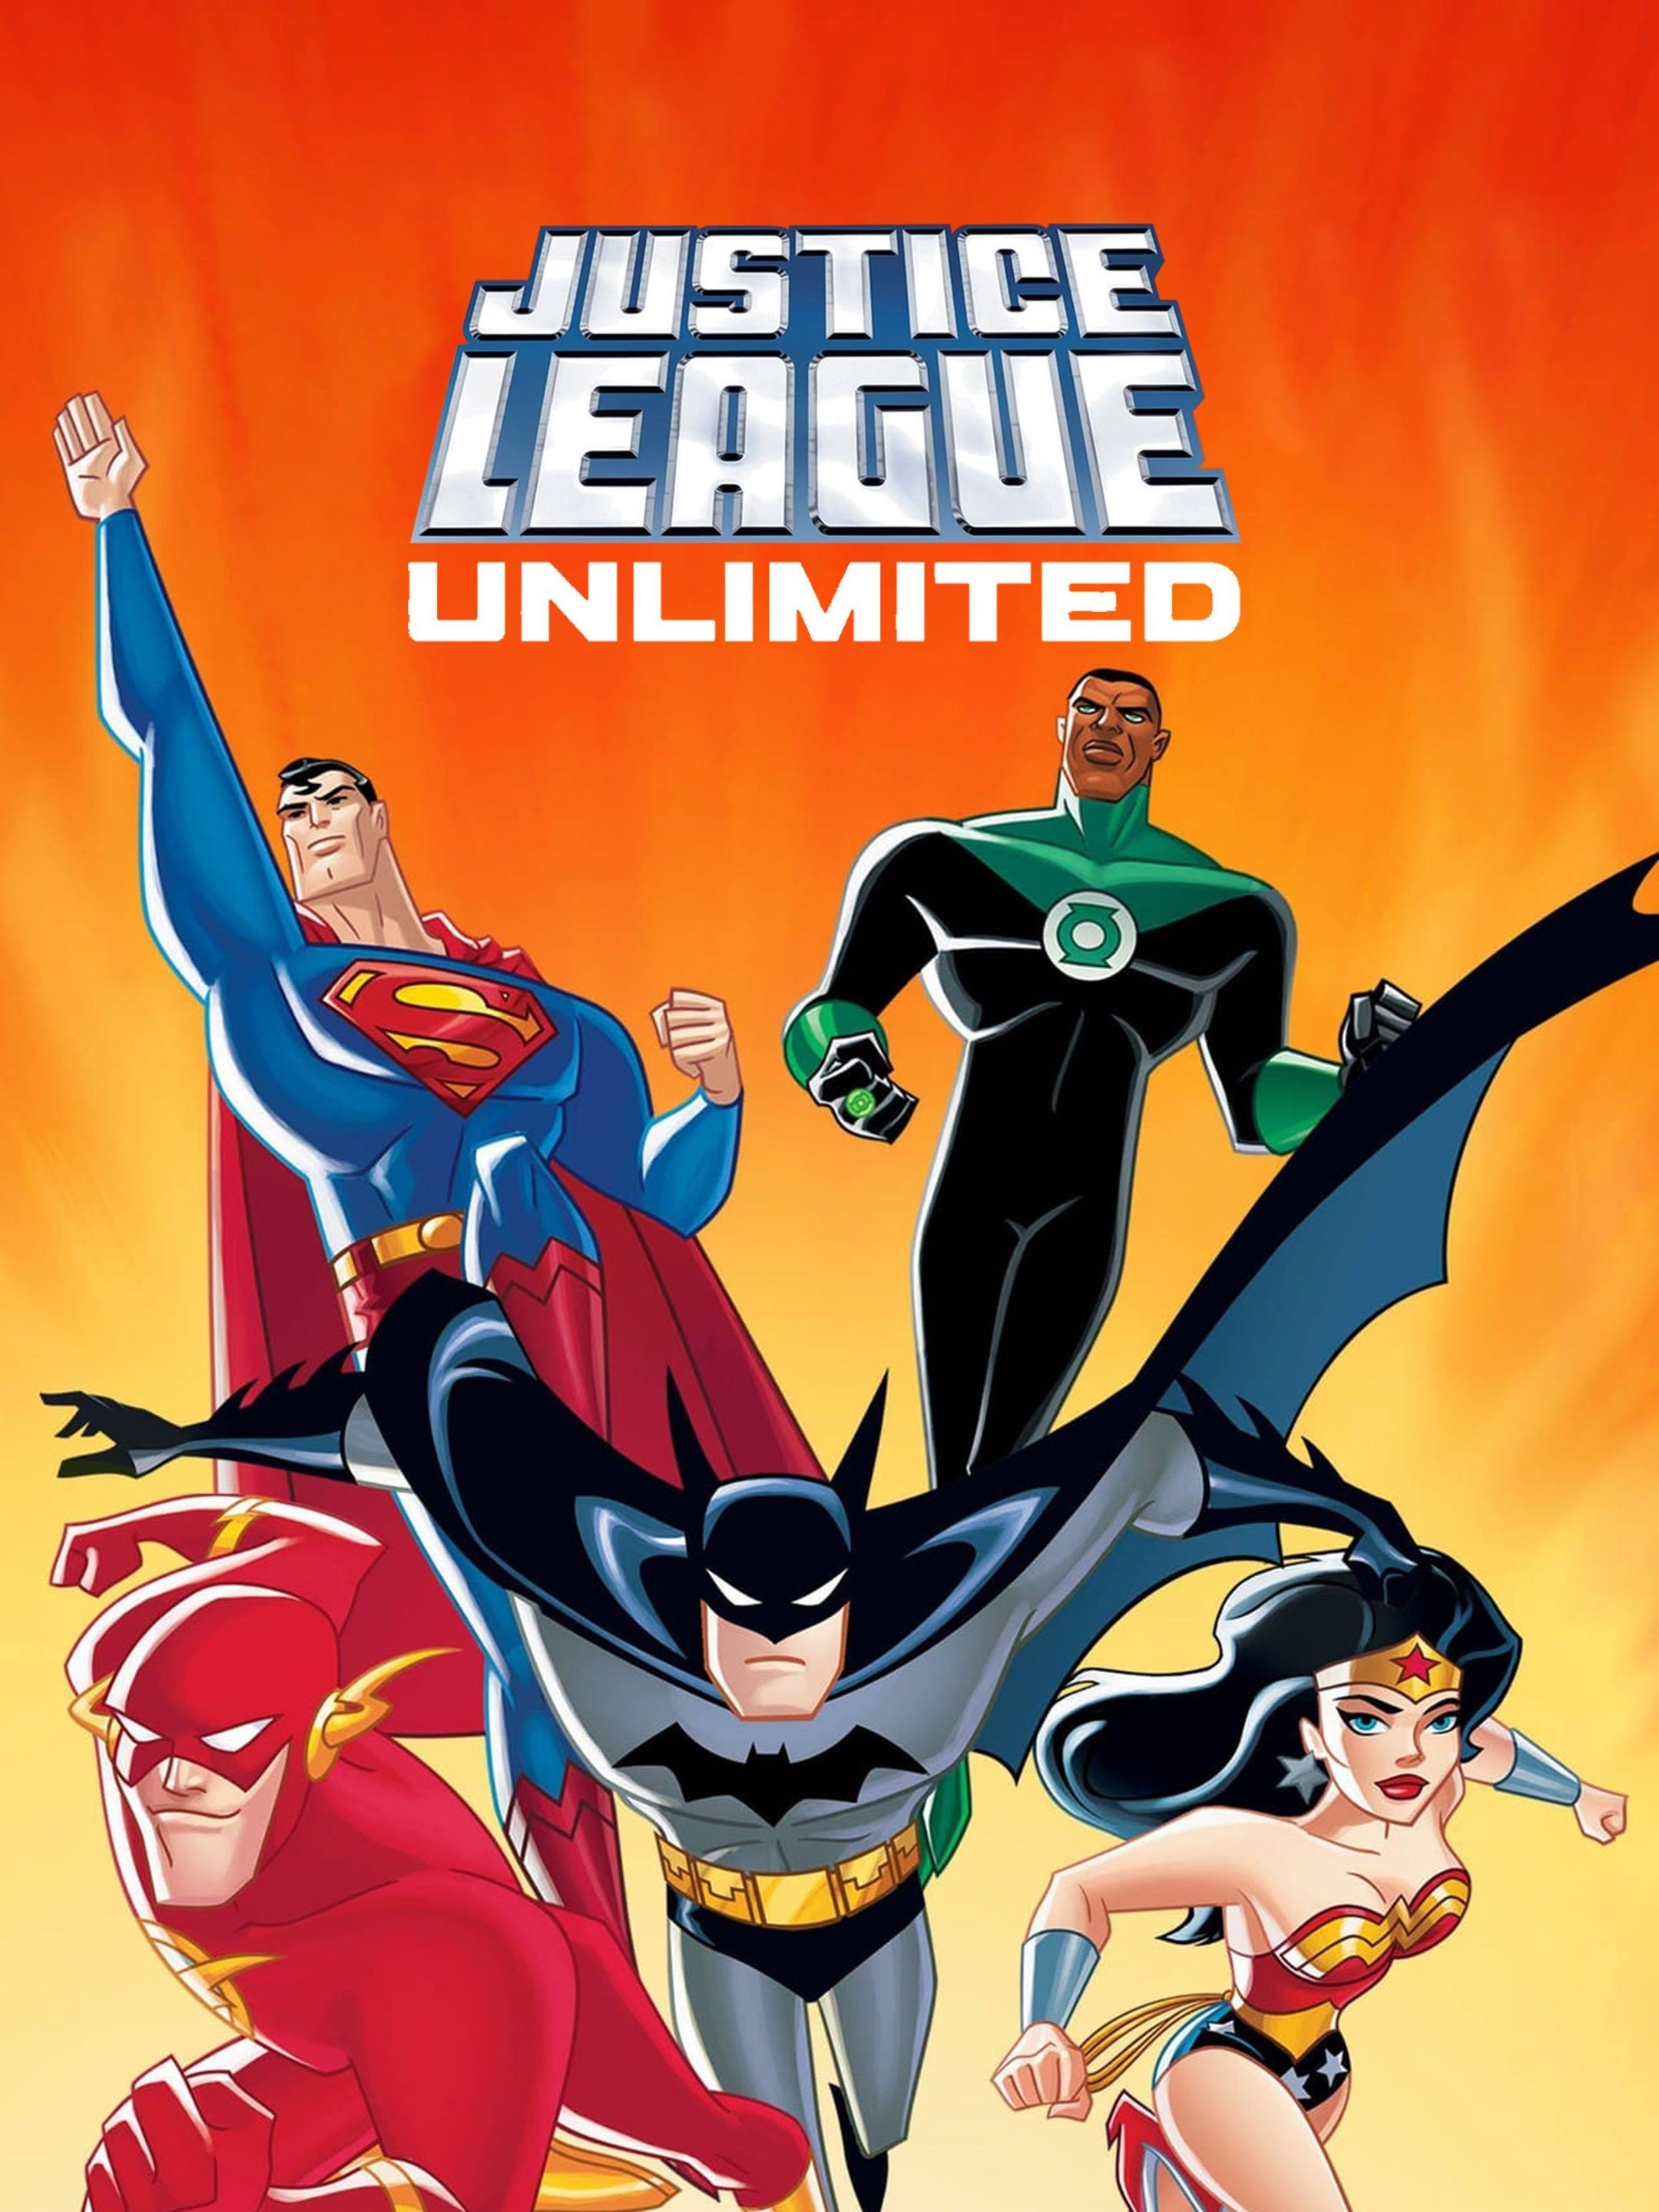 Justice League Streaming Tv Show Online, 46% OFF